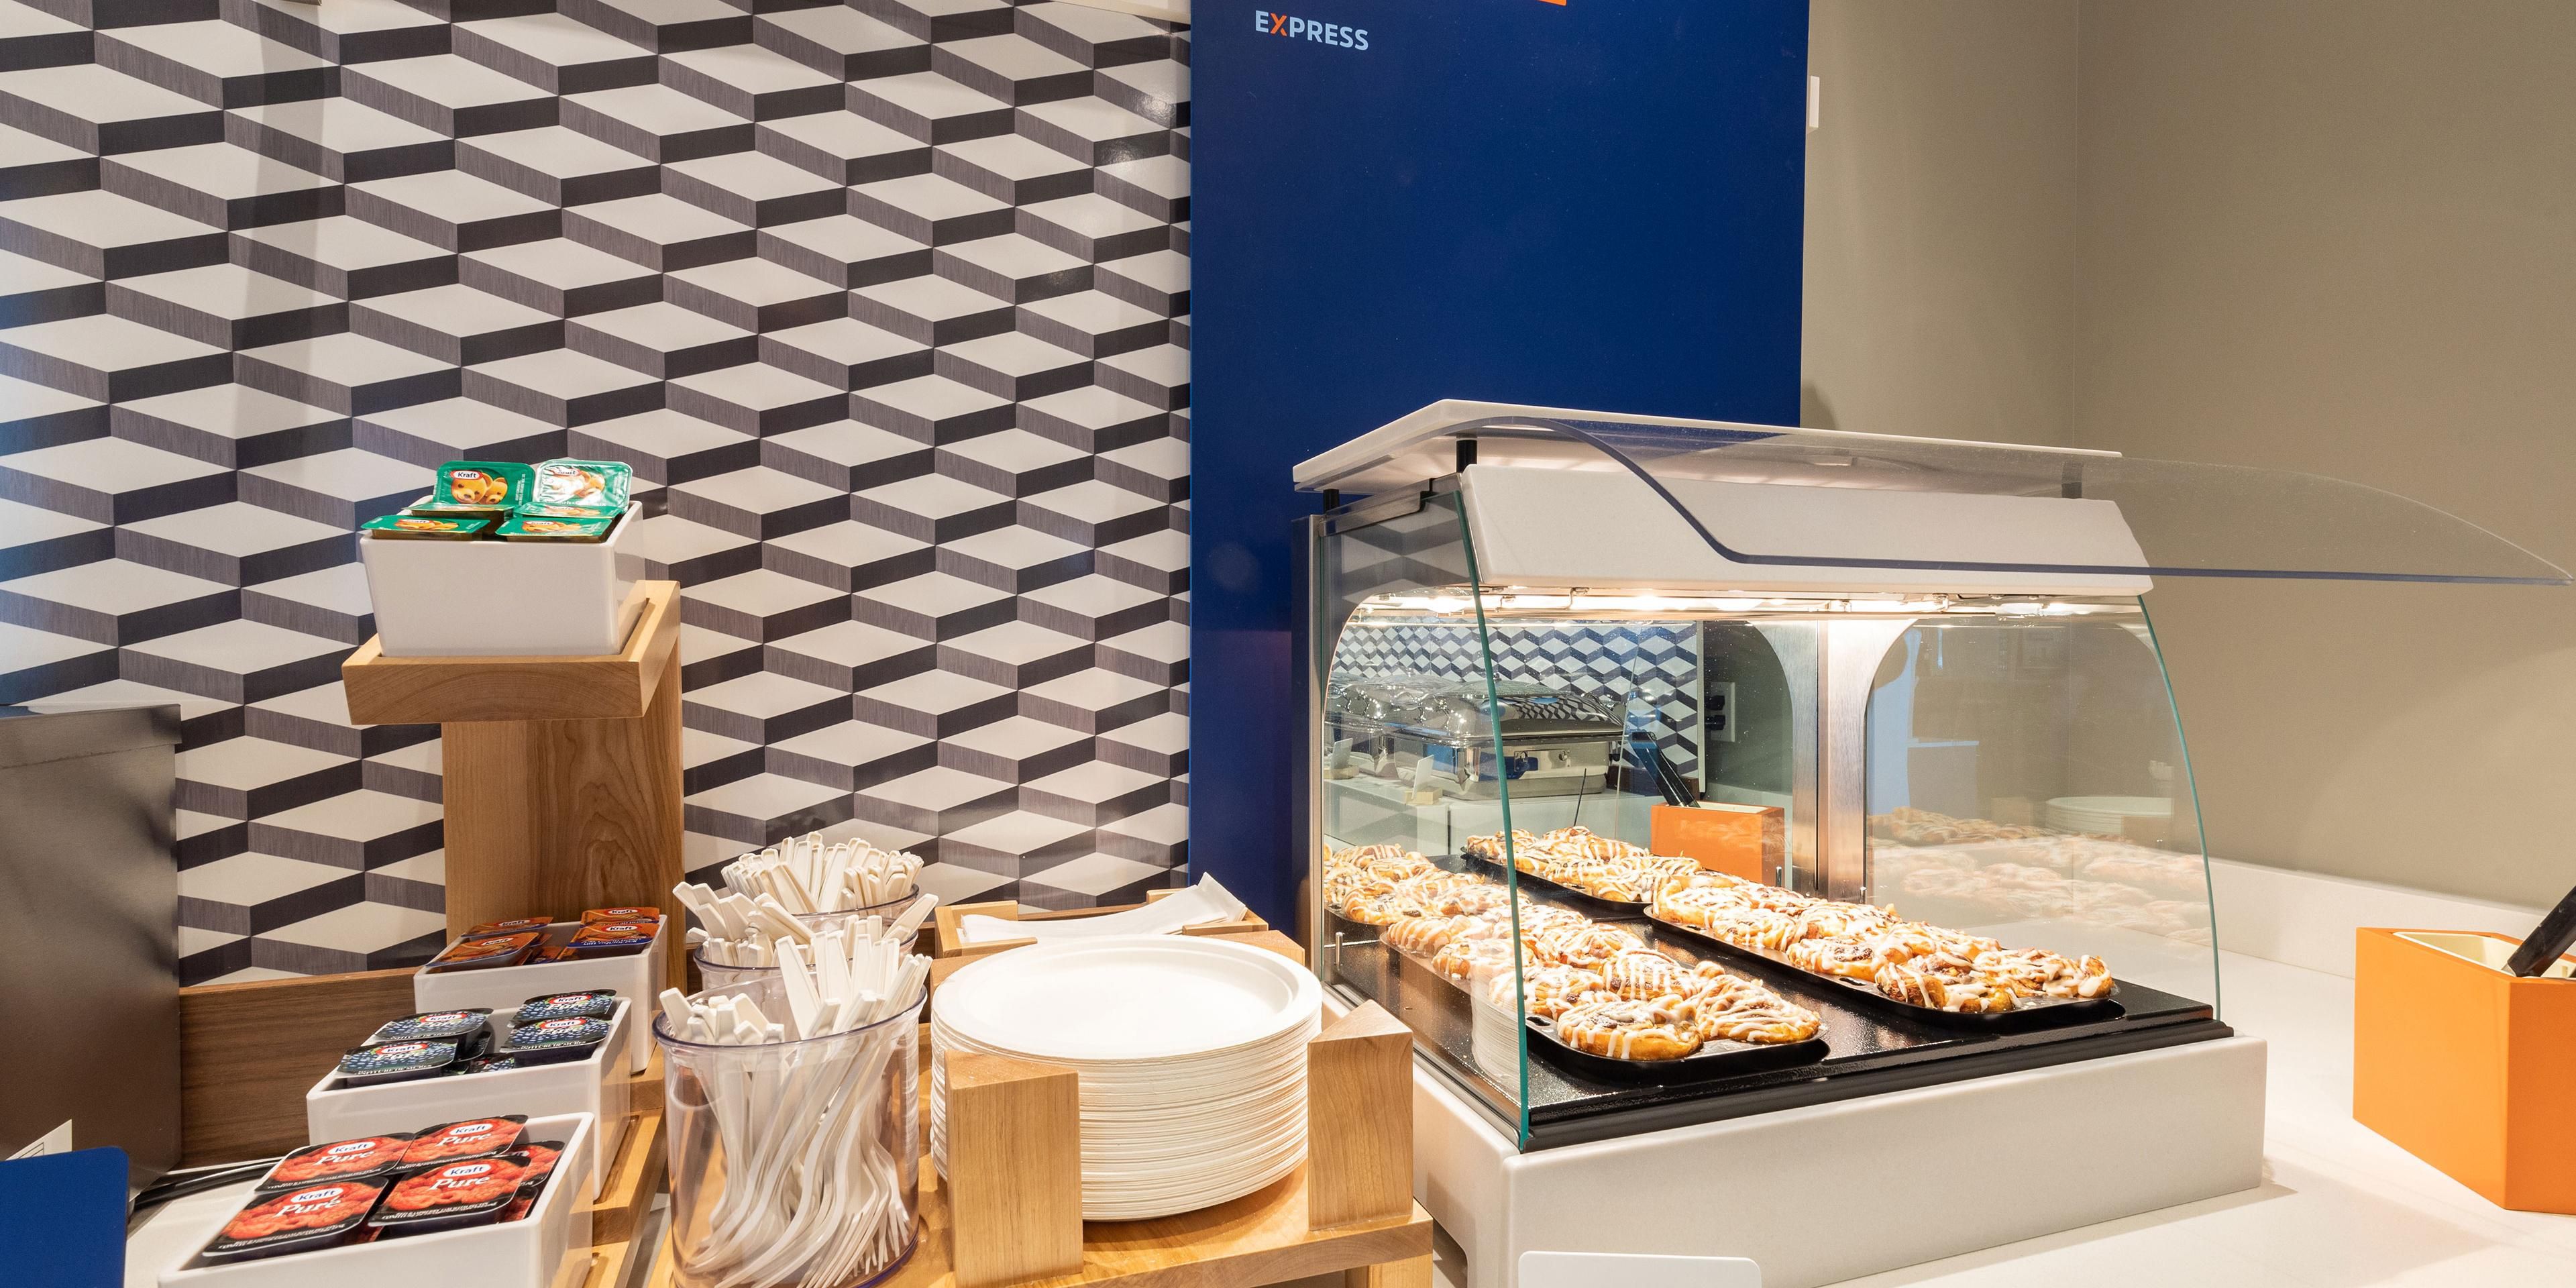 Wake up each morning and jump-start your stay at our Express Start Breakfast bar.  You will find a full range of breakfast items including egg white omelets, Chobani yogurt, whole wheat English muffins, oatmeal, cereal and a one-touch pancake machine.